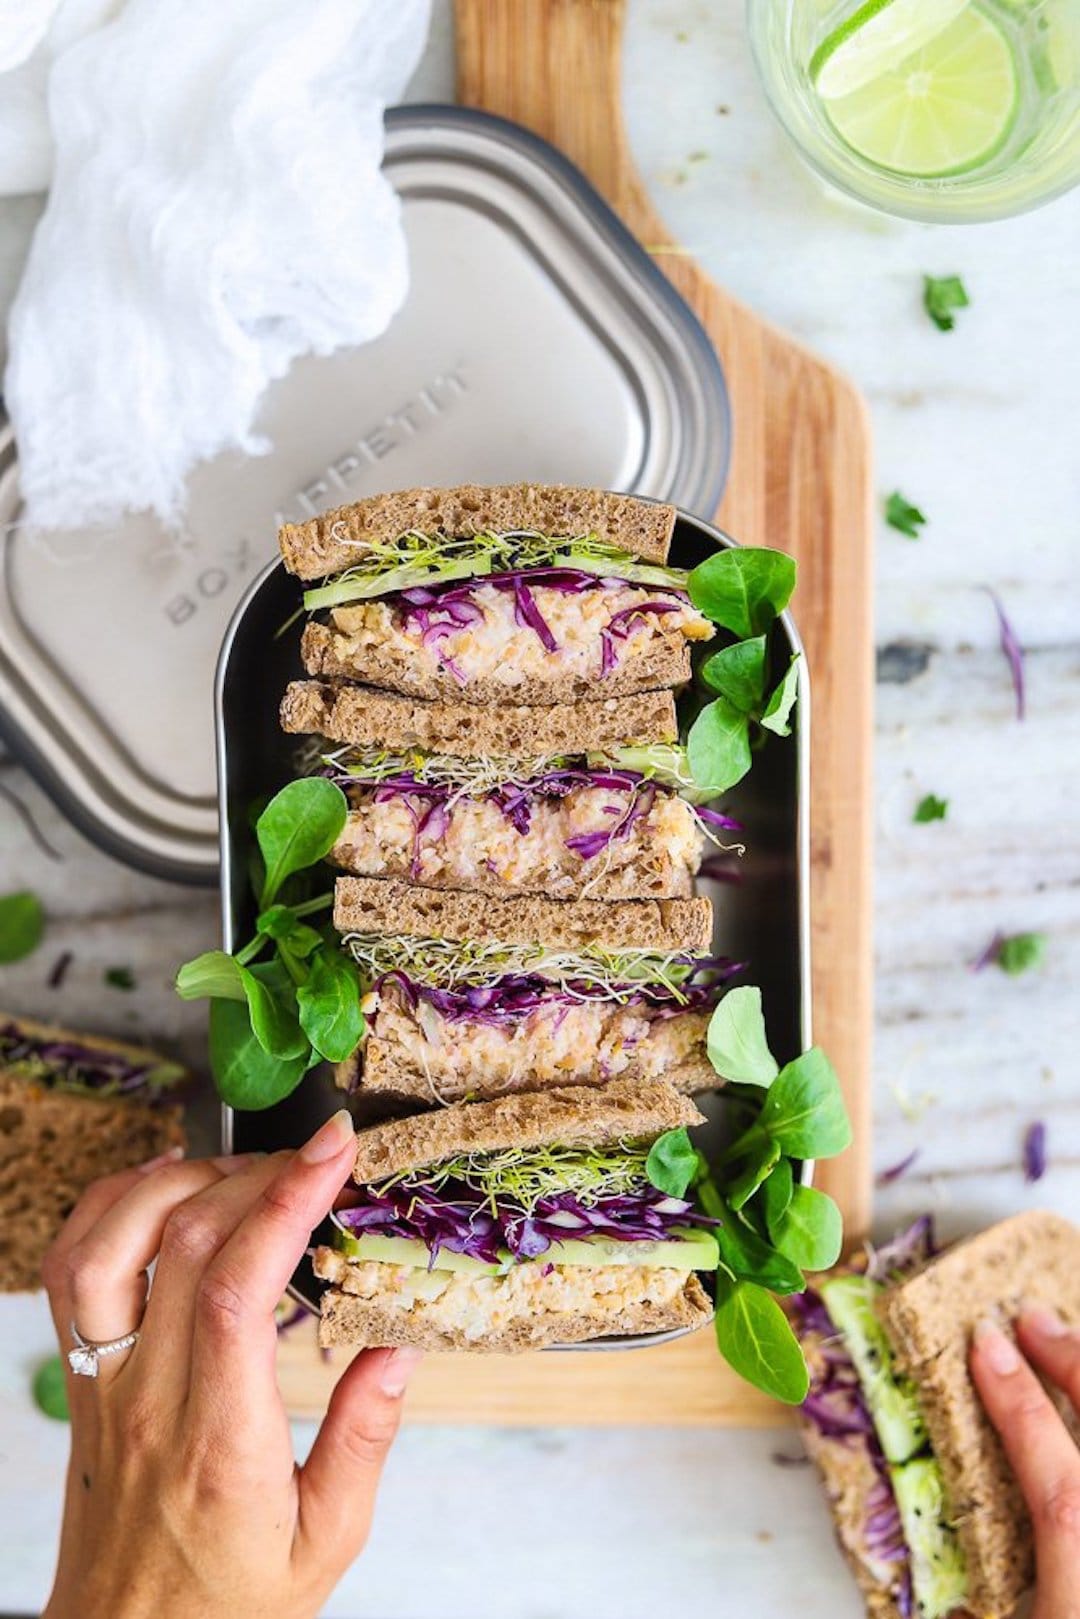 11 Yummy Plant Based Sandwiches - Vegan Chickpea Sandwiches by Two Spoons